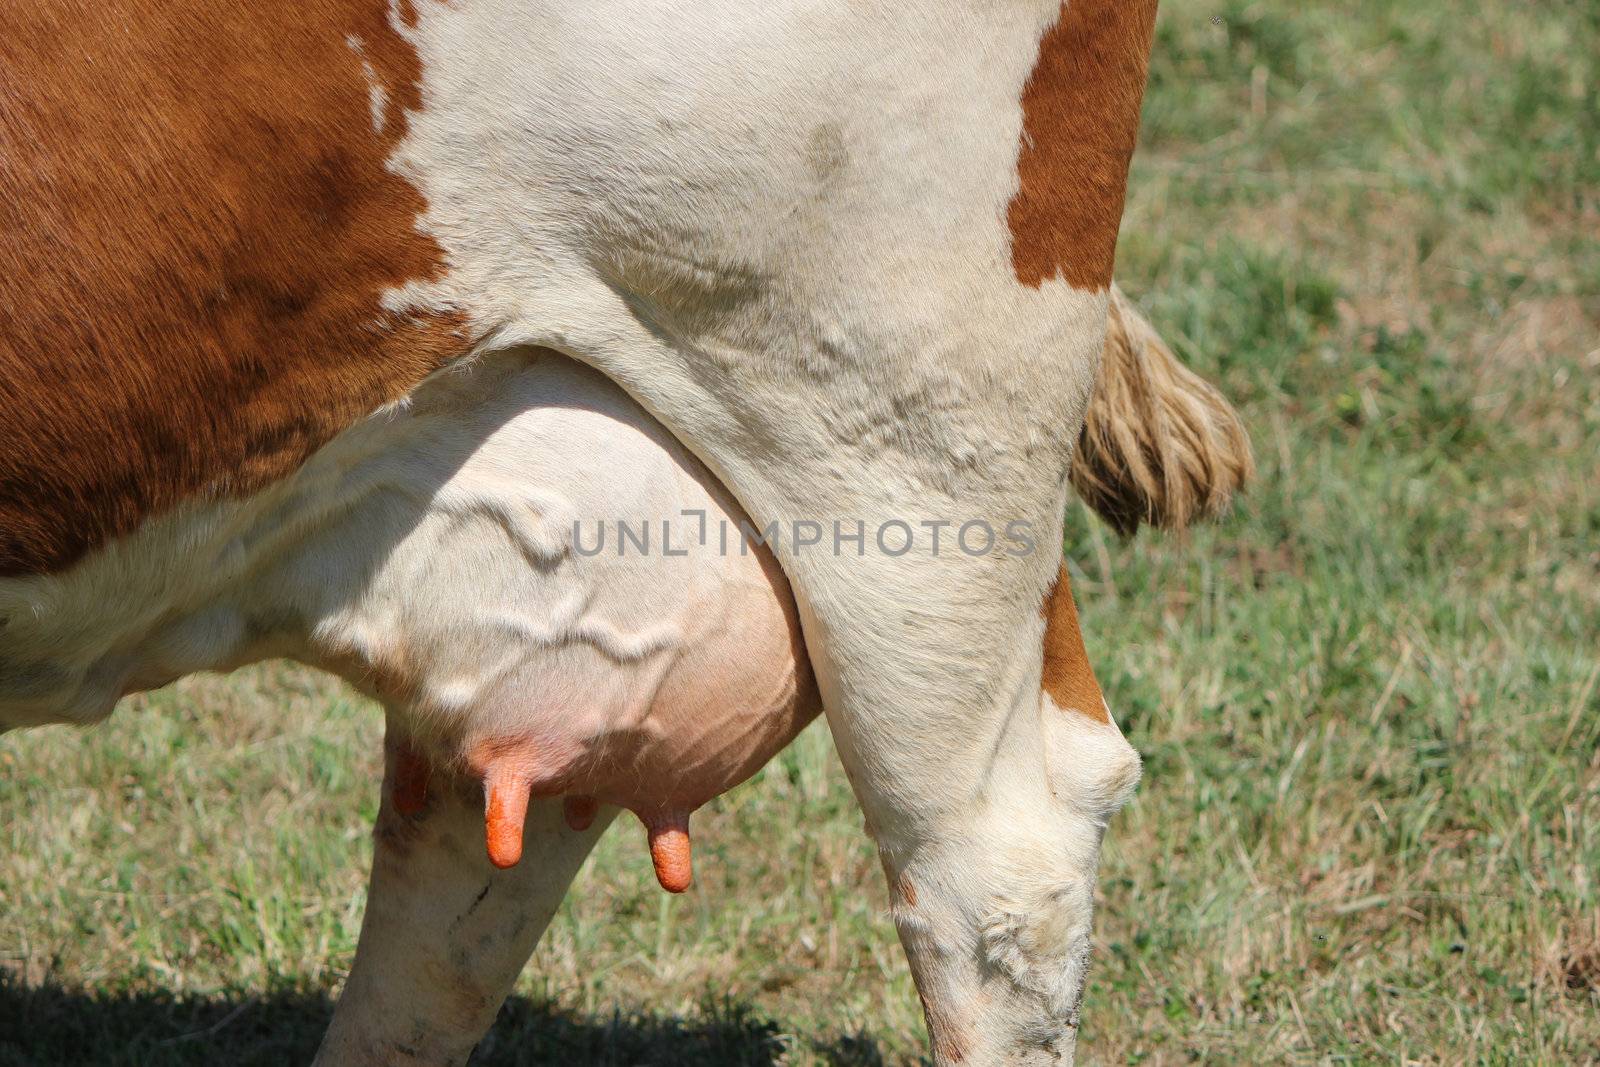 Udders of a cow by Elenaphotos21